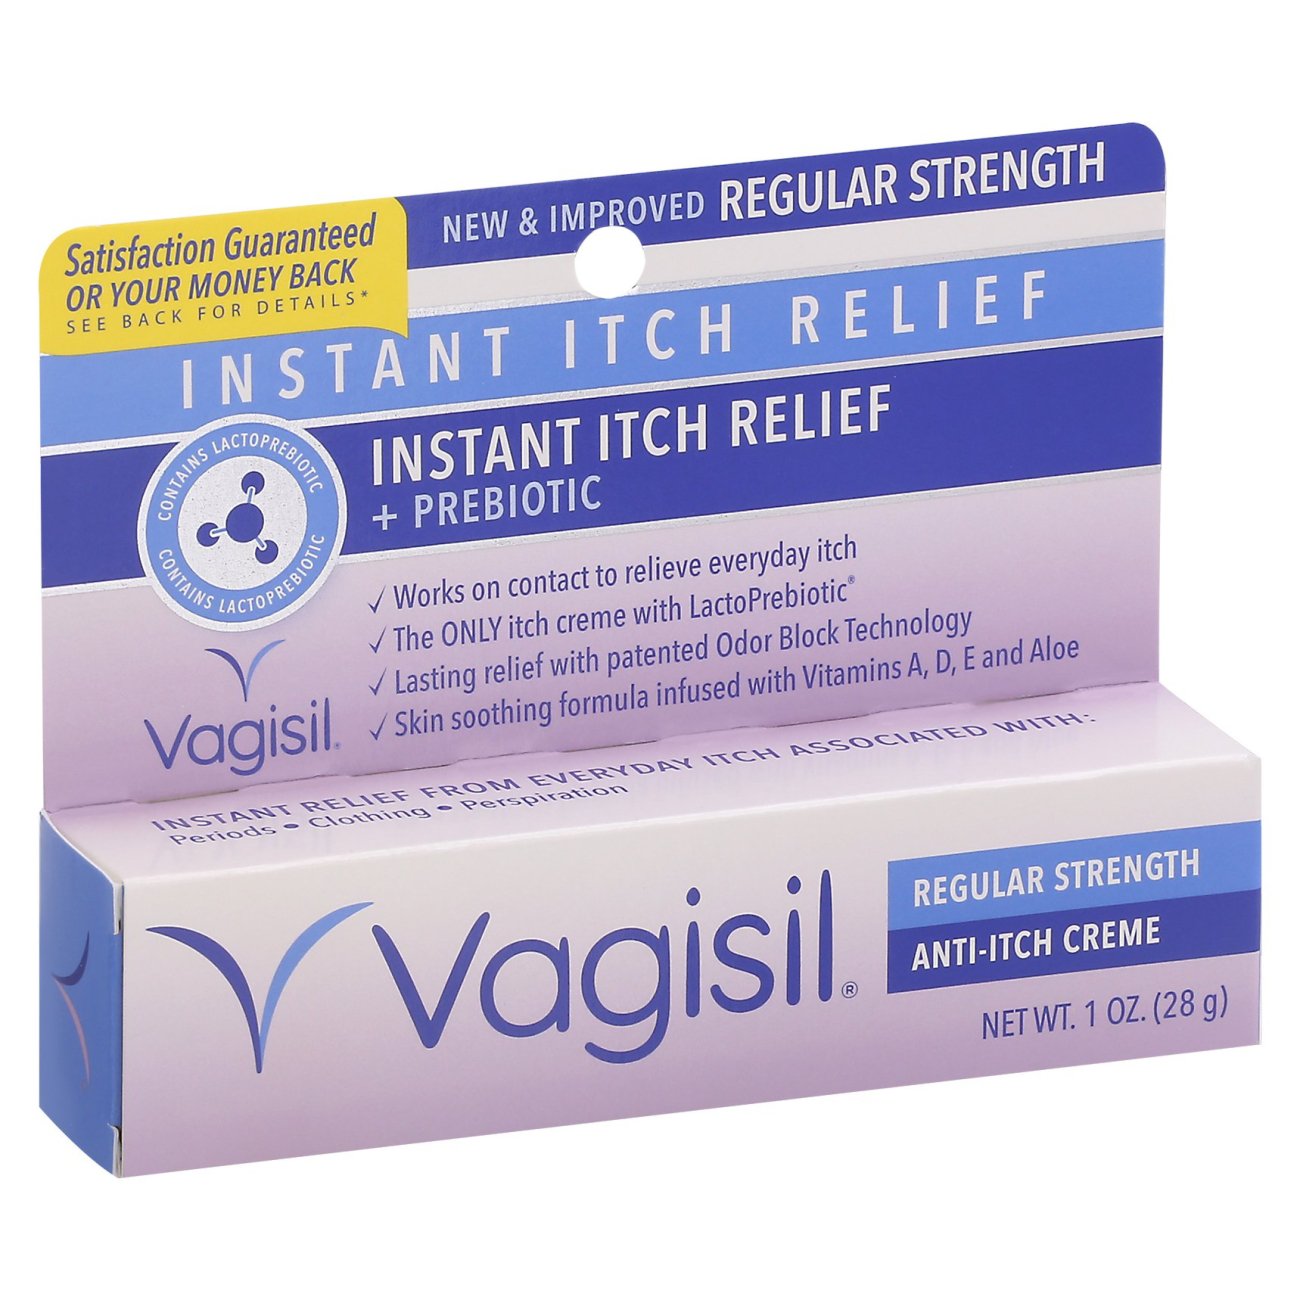 Vagisil Anti Itch Creme Regular Strength Shop Medicines And Treatments At H E B 0363